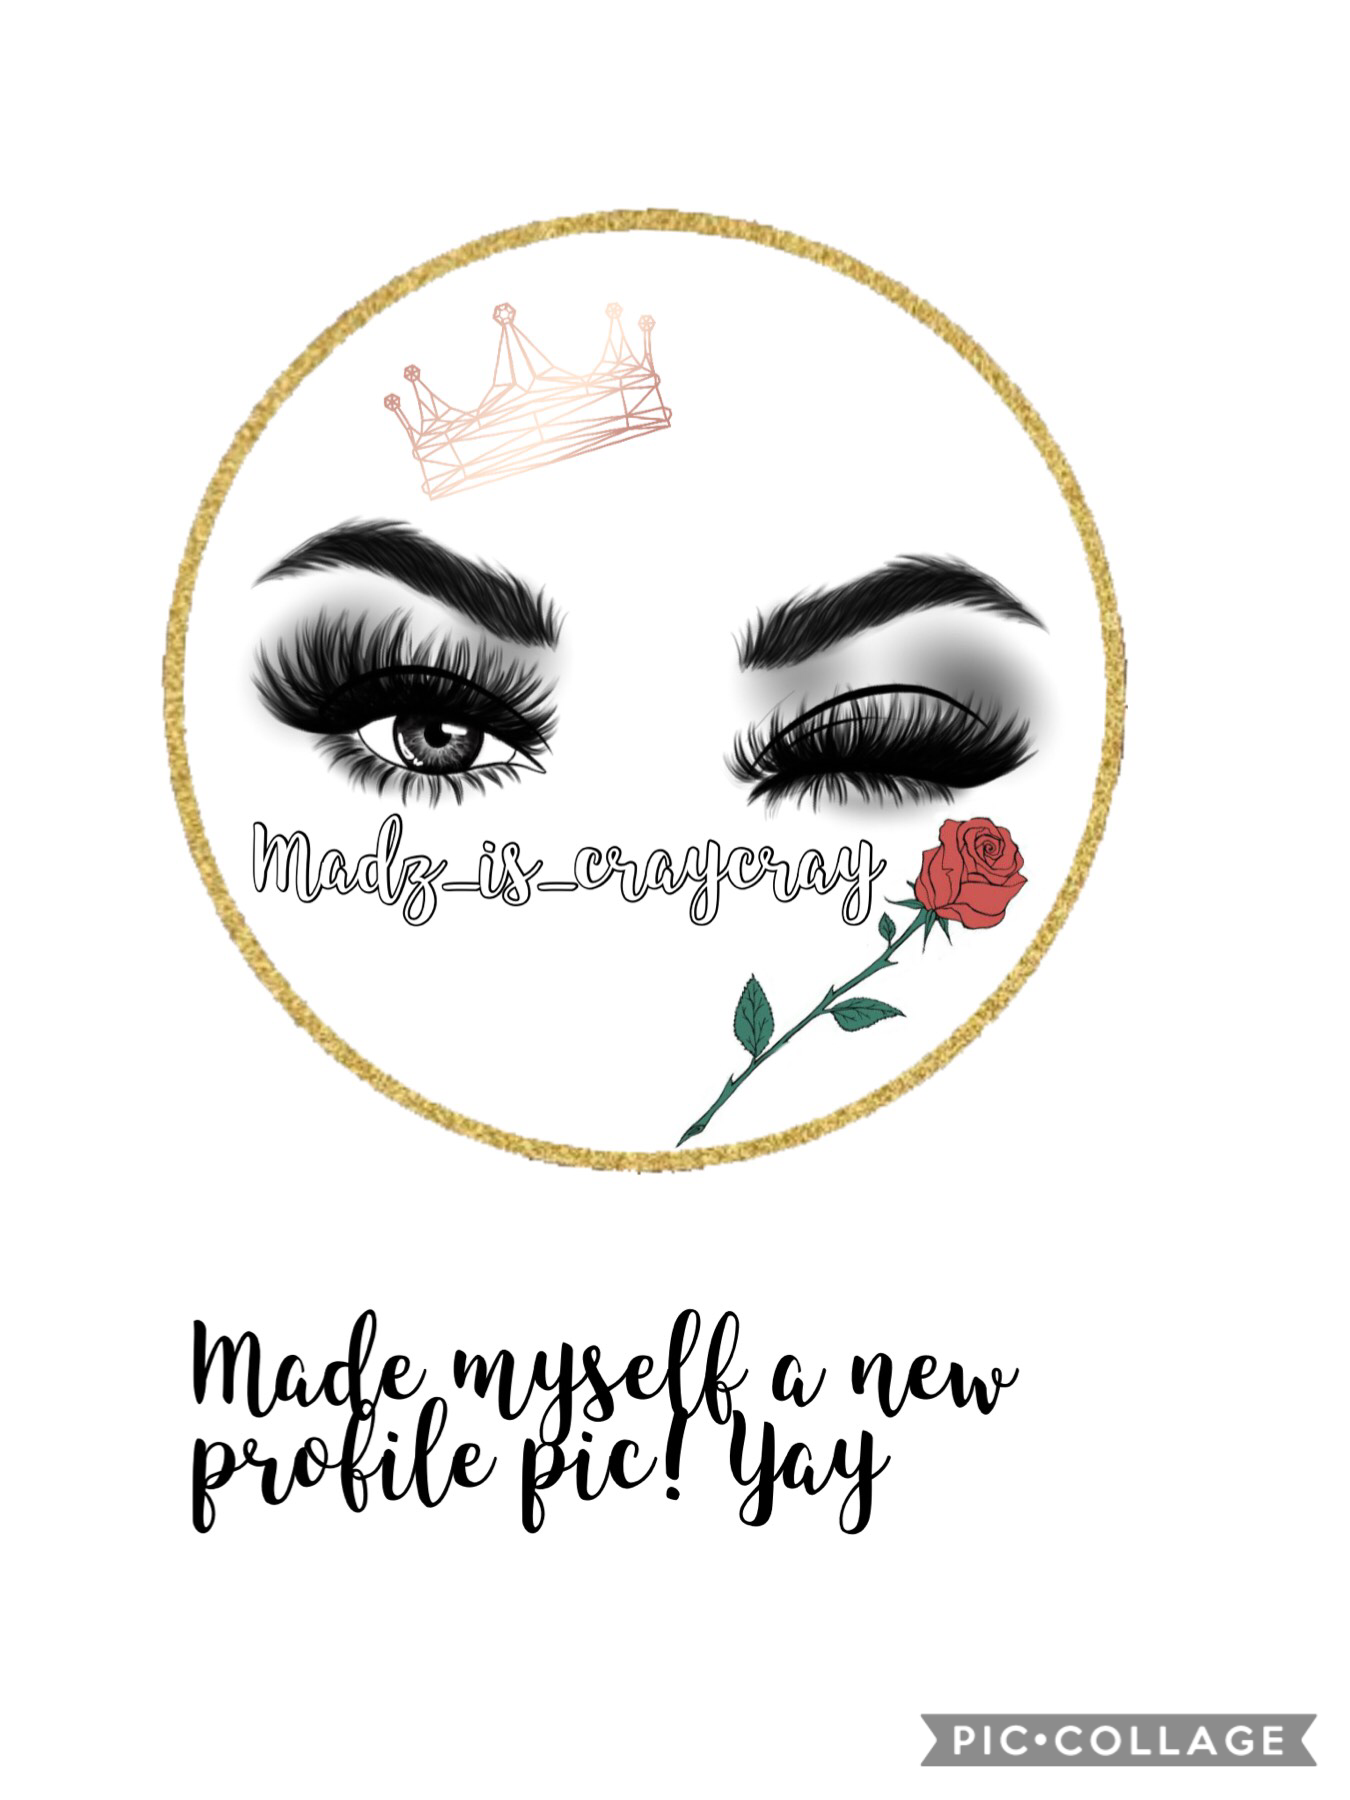 New profile picture! Made by me, tbh I’m proud of it! 💕 byeeeeeee #madzfam